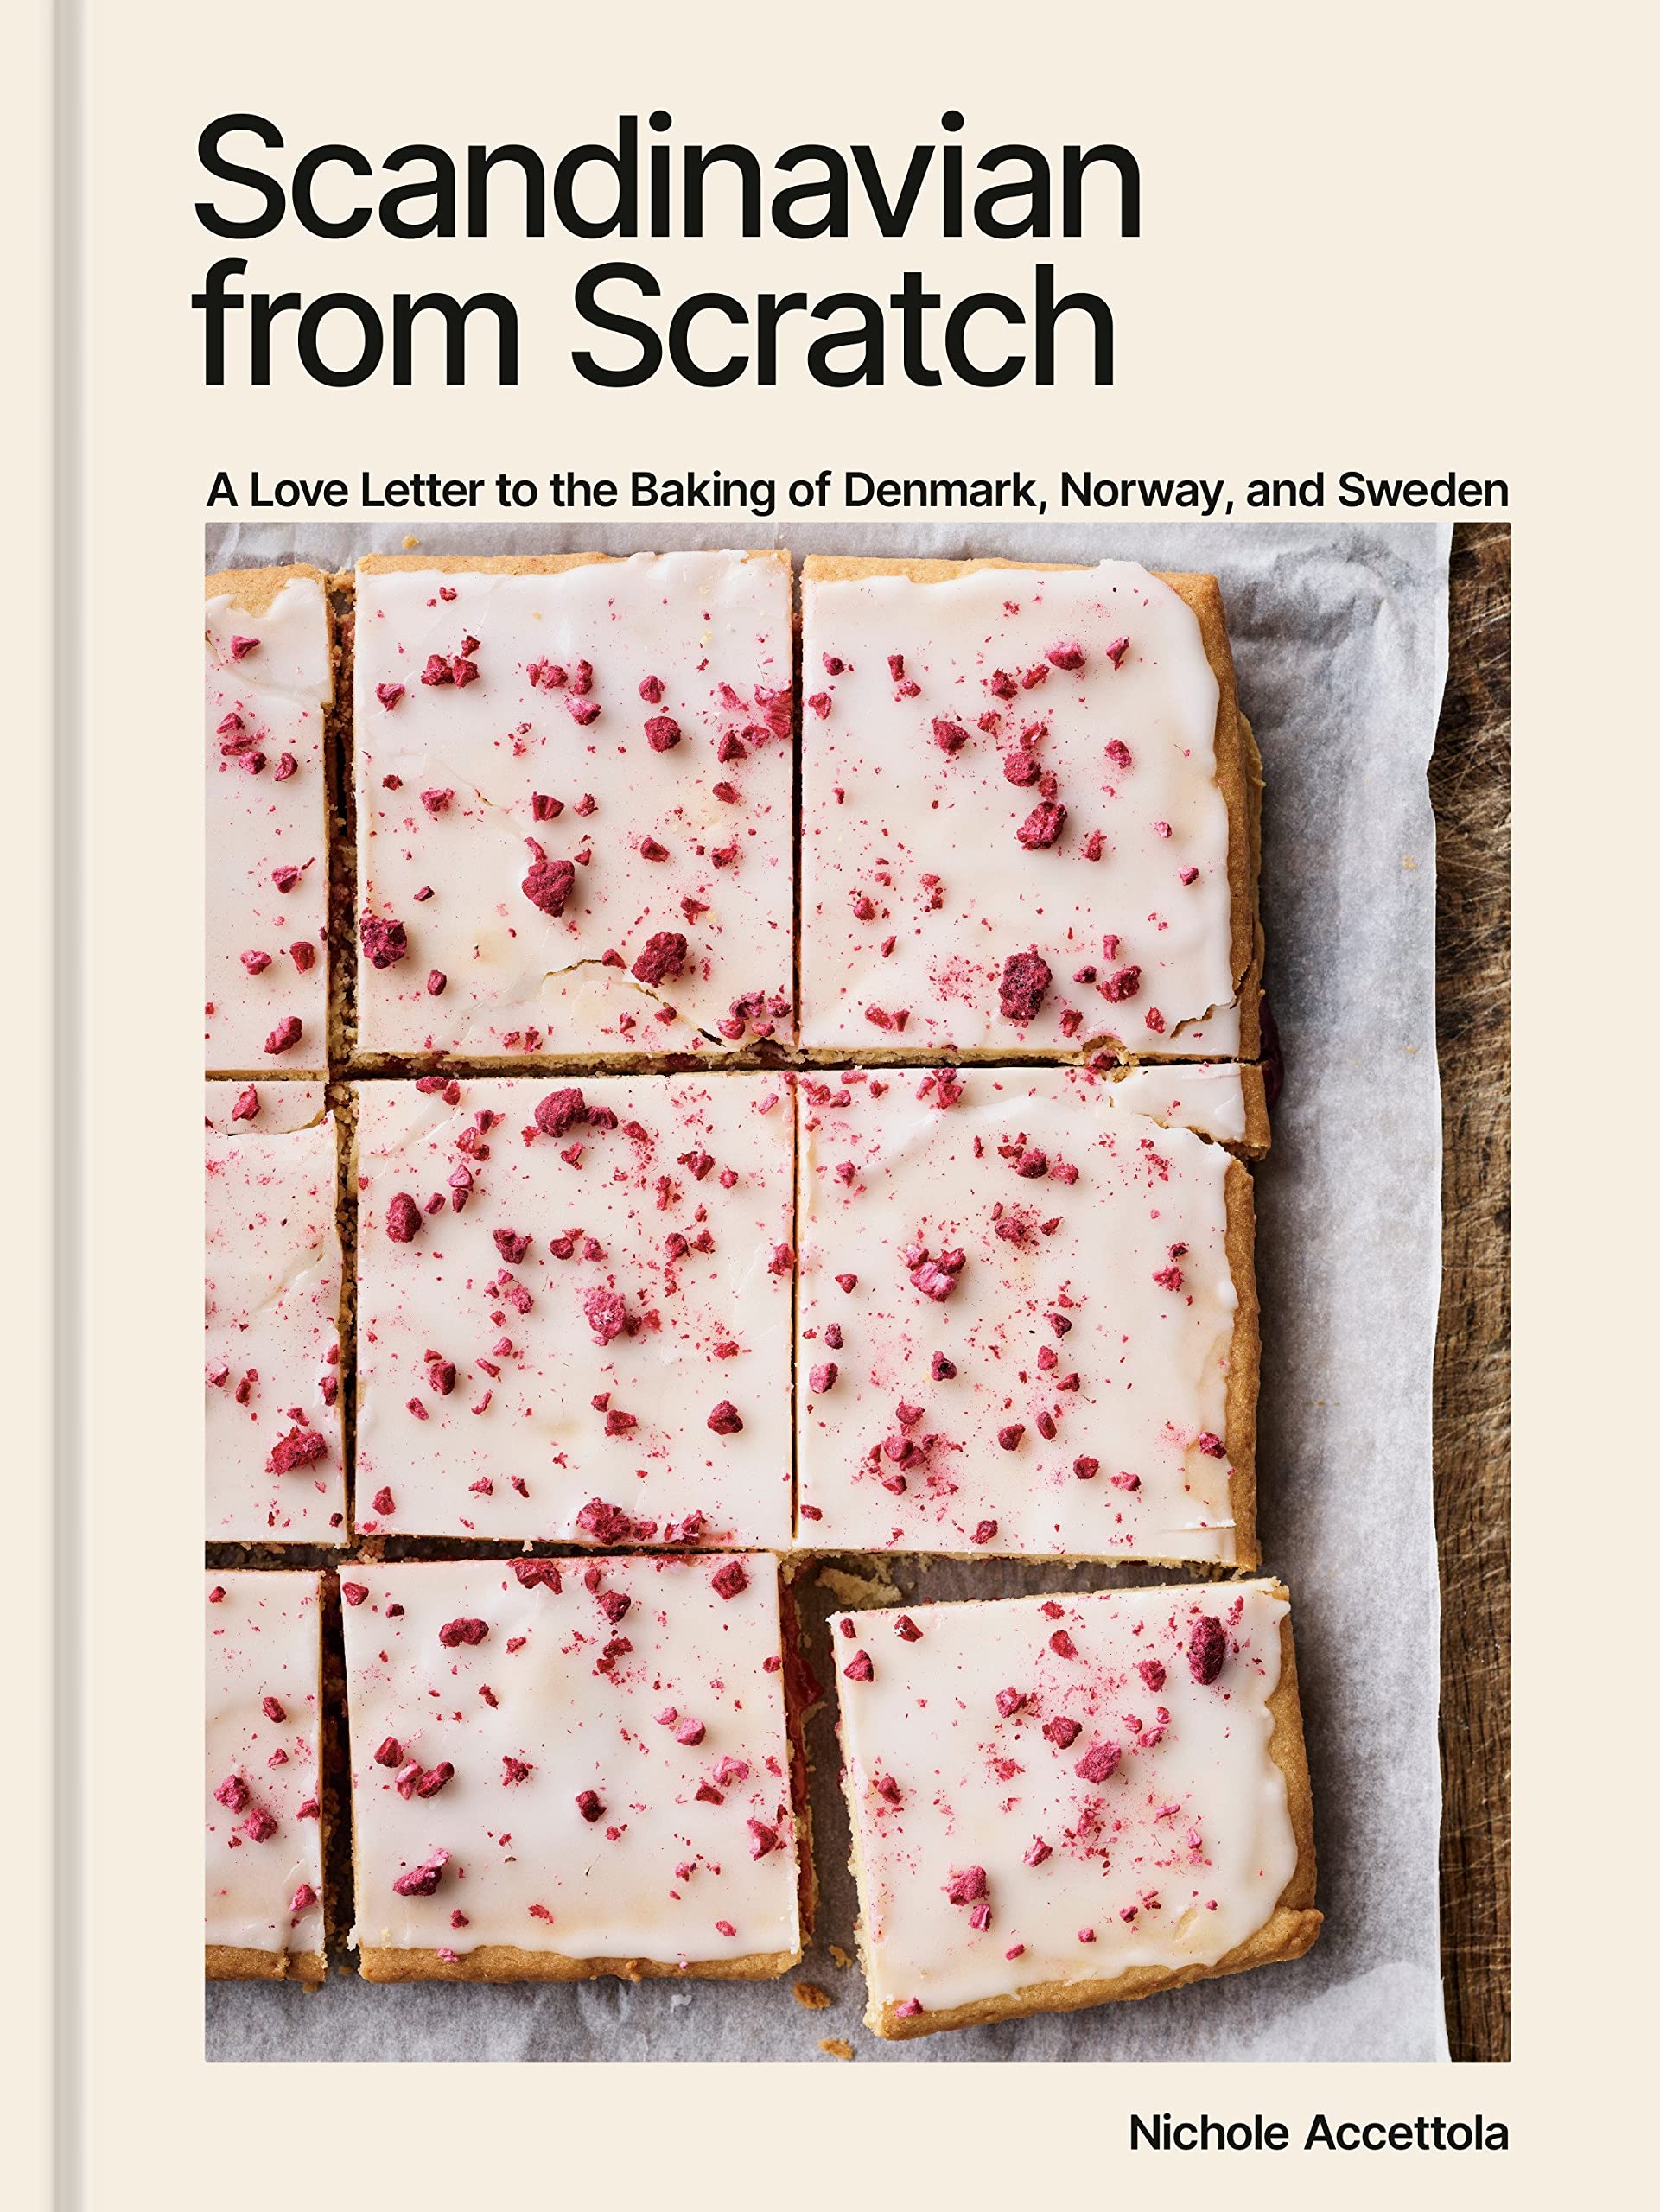 Scandinavian from Scratch: A Love Letter to the Baking of Denmark, Norway, and Sweden (Nichole Accettola) *Signed*